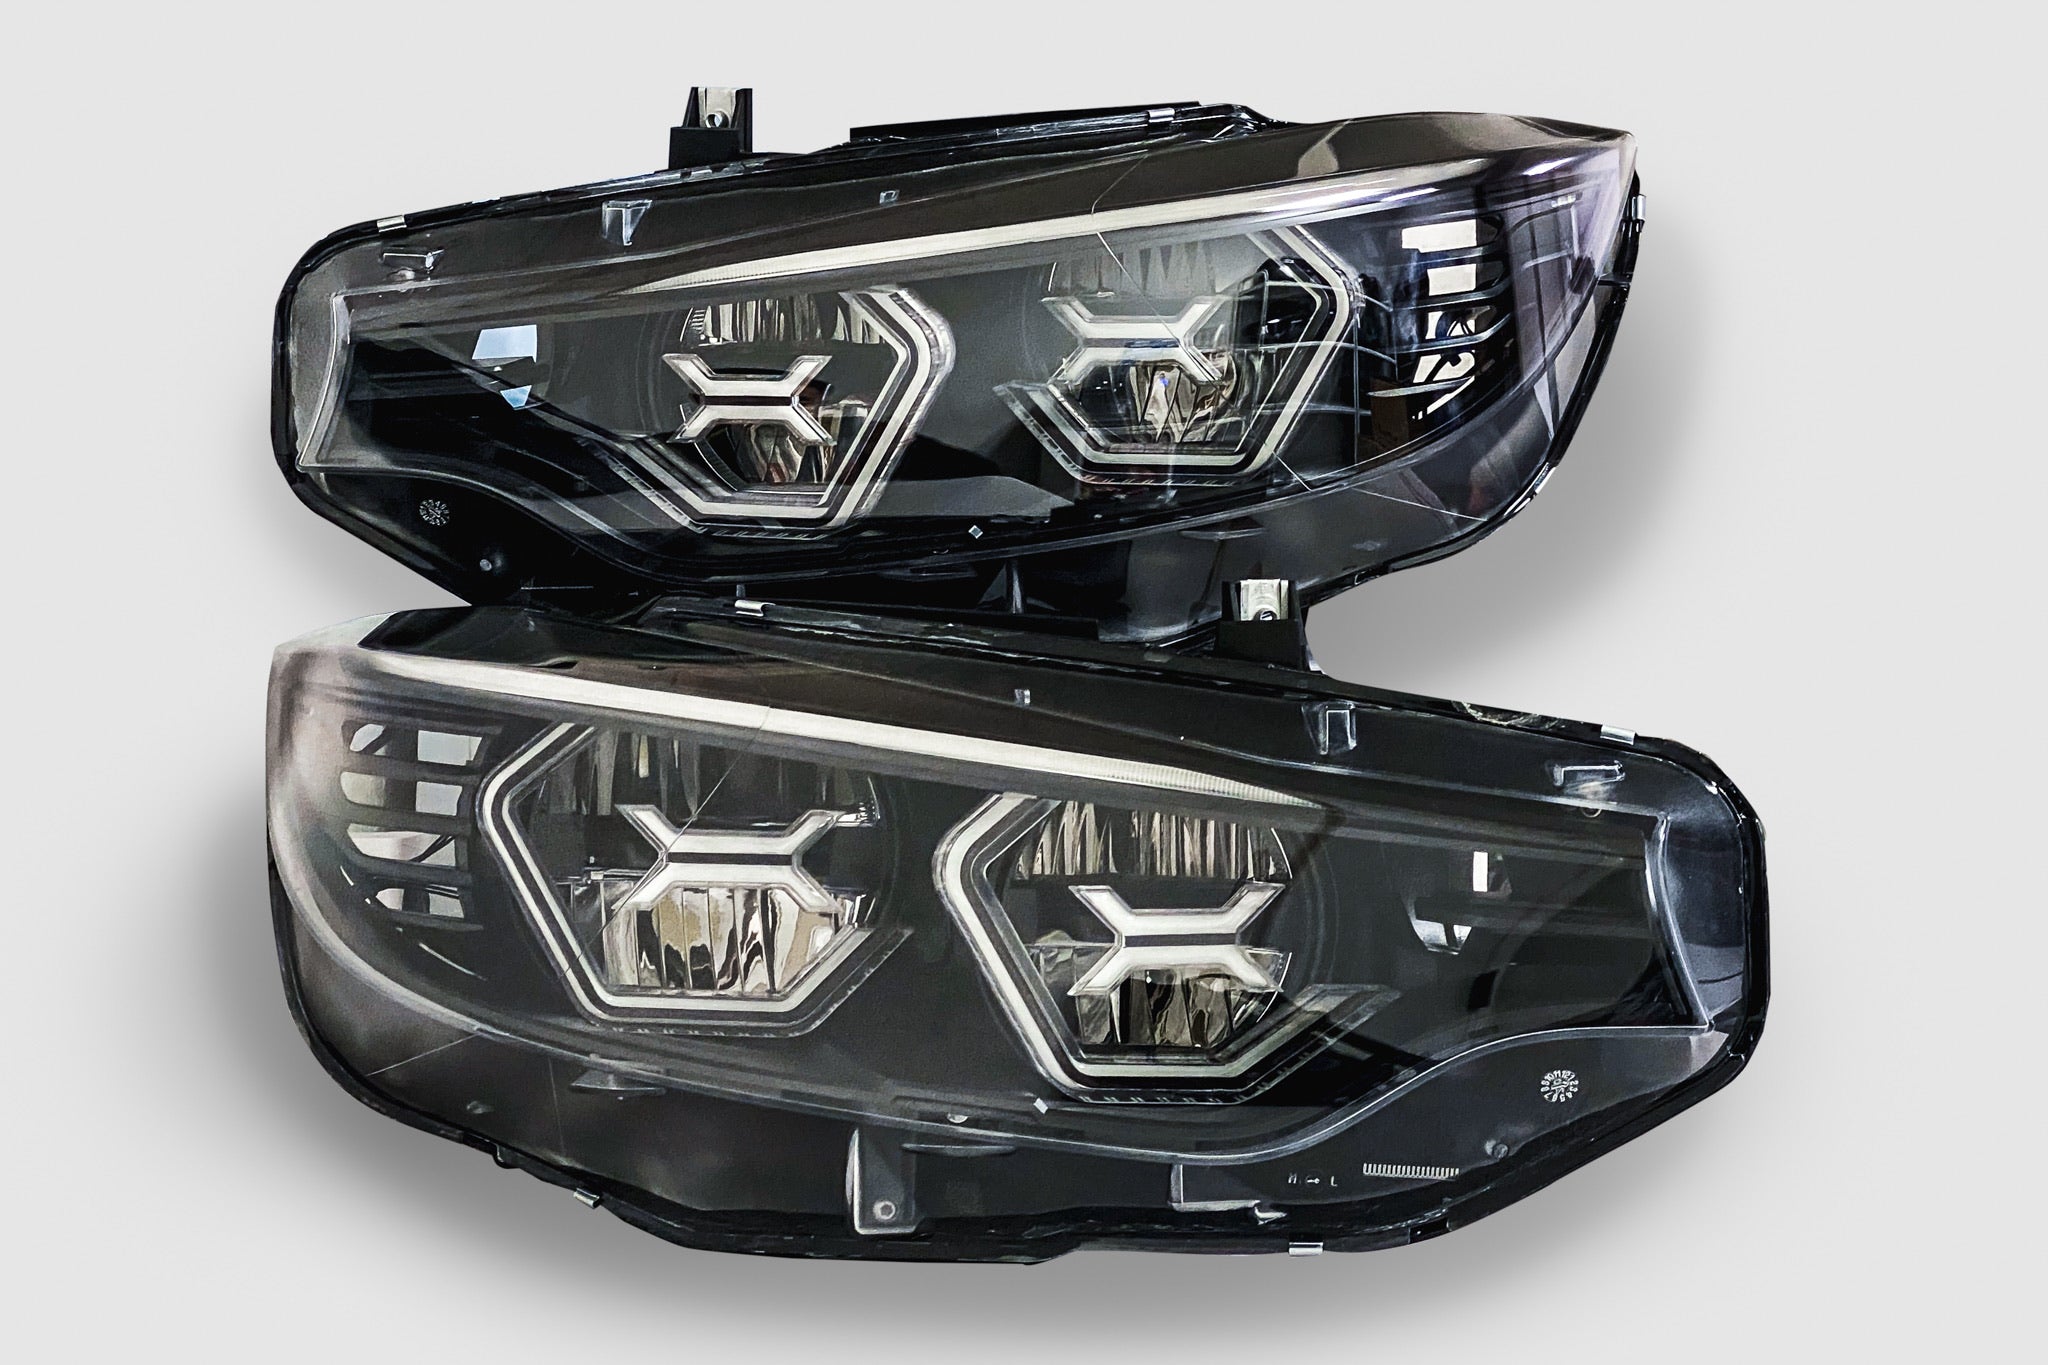 PRE-BUILT F8X F80 M3 F82 F83 M4 F32 F36 Vision Concept Headlights With Blue Concept X (2014 - 2017 LED Headlights Only)